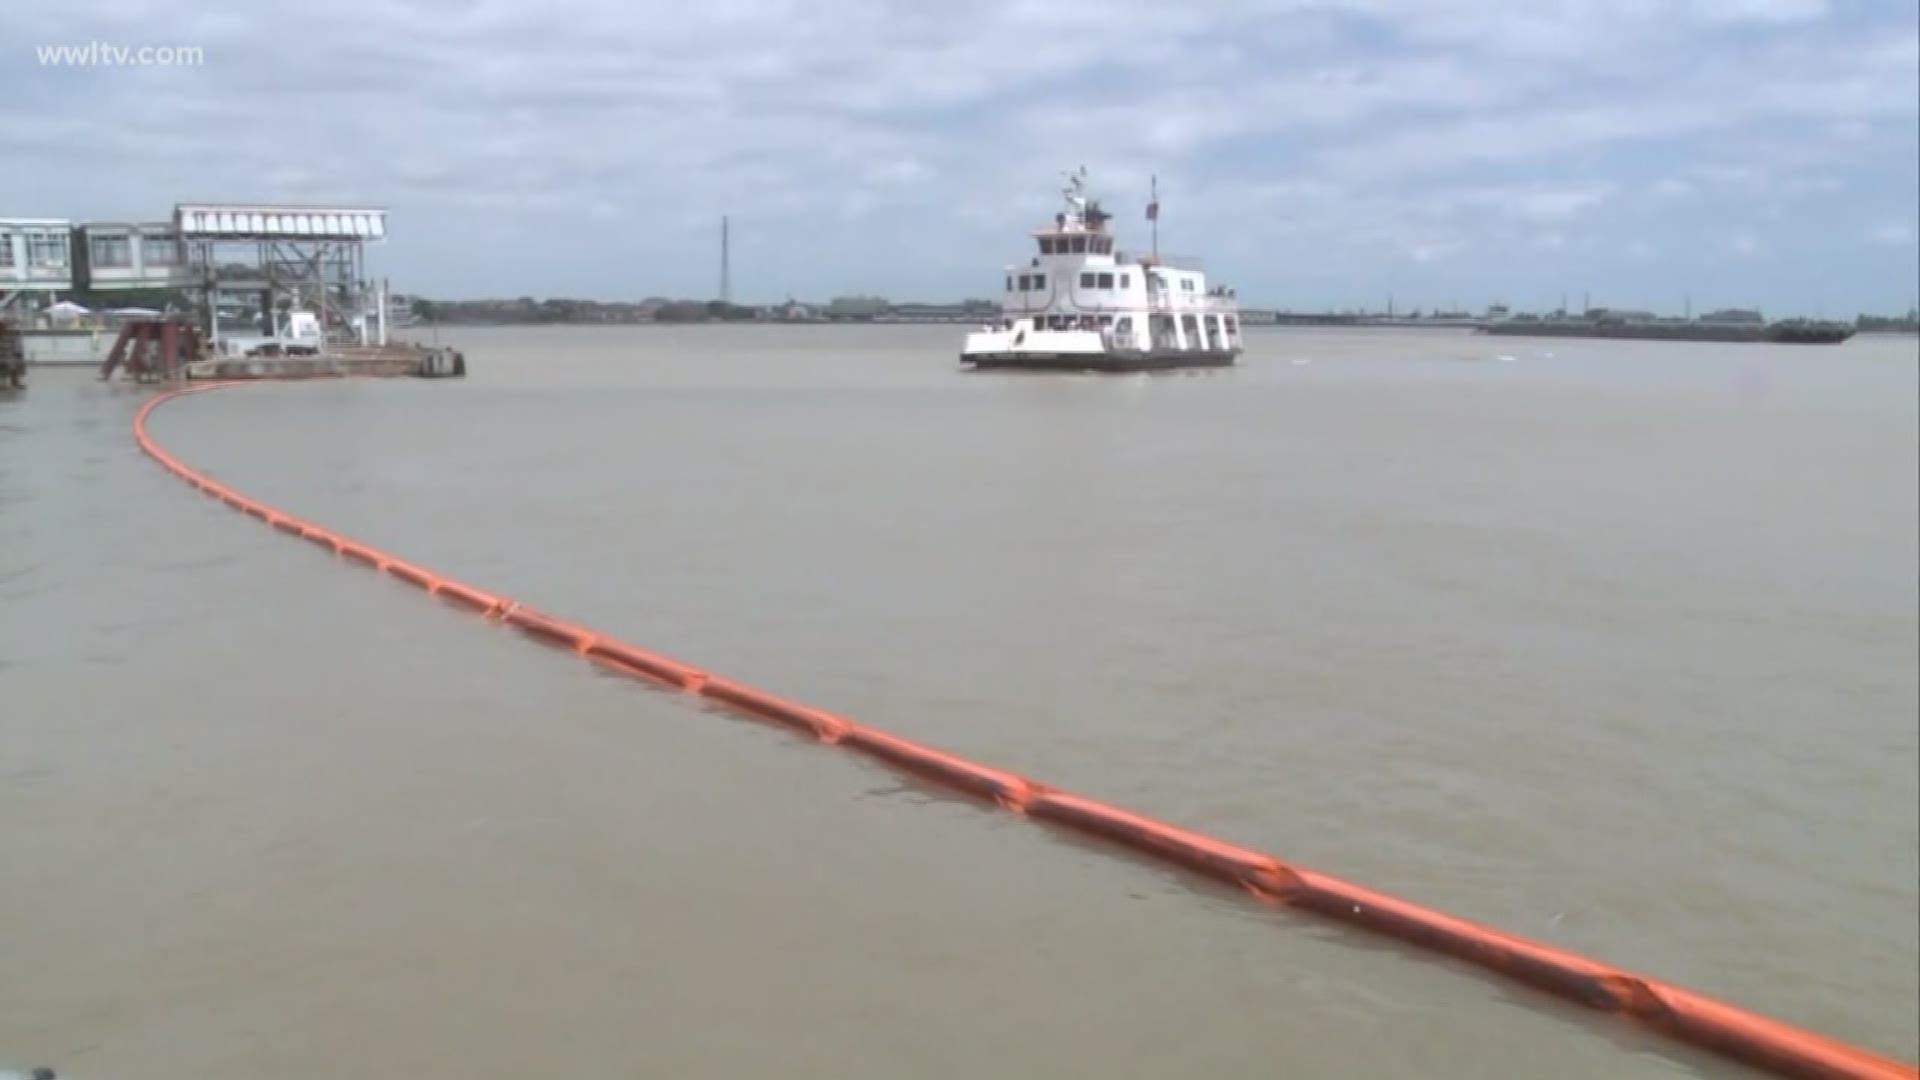 Oil spill clean-up operations continue on Mississippi River